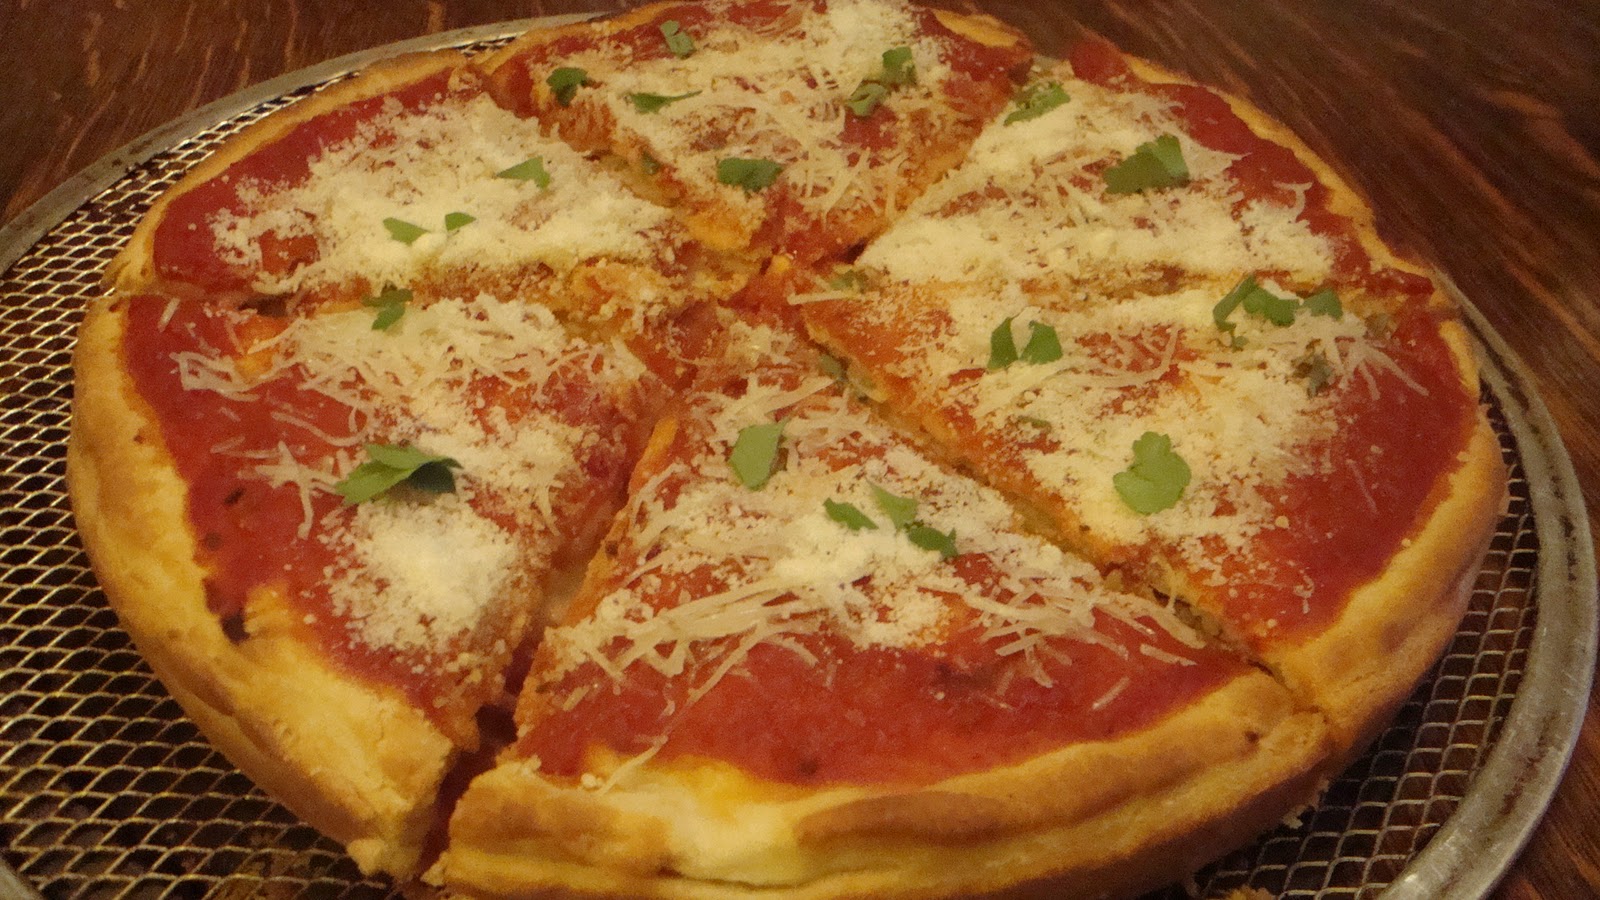 Learning Knowledge to Make Pizza: Giordano’s Stuffed Deep-Dish Pizza